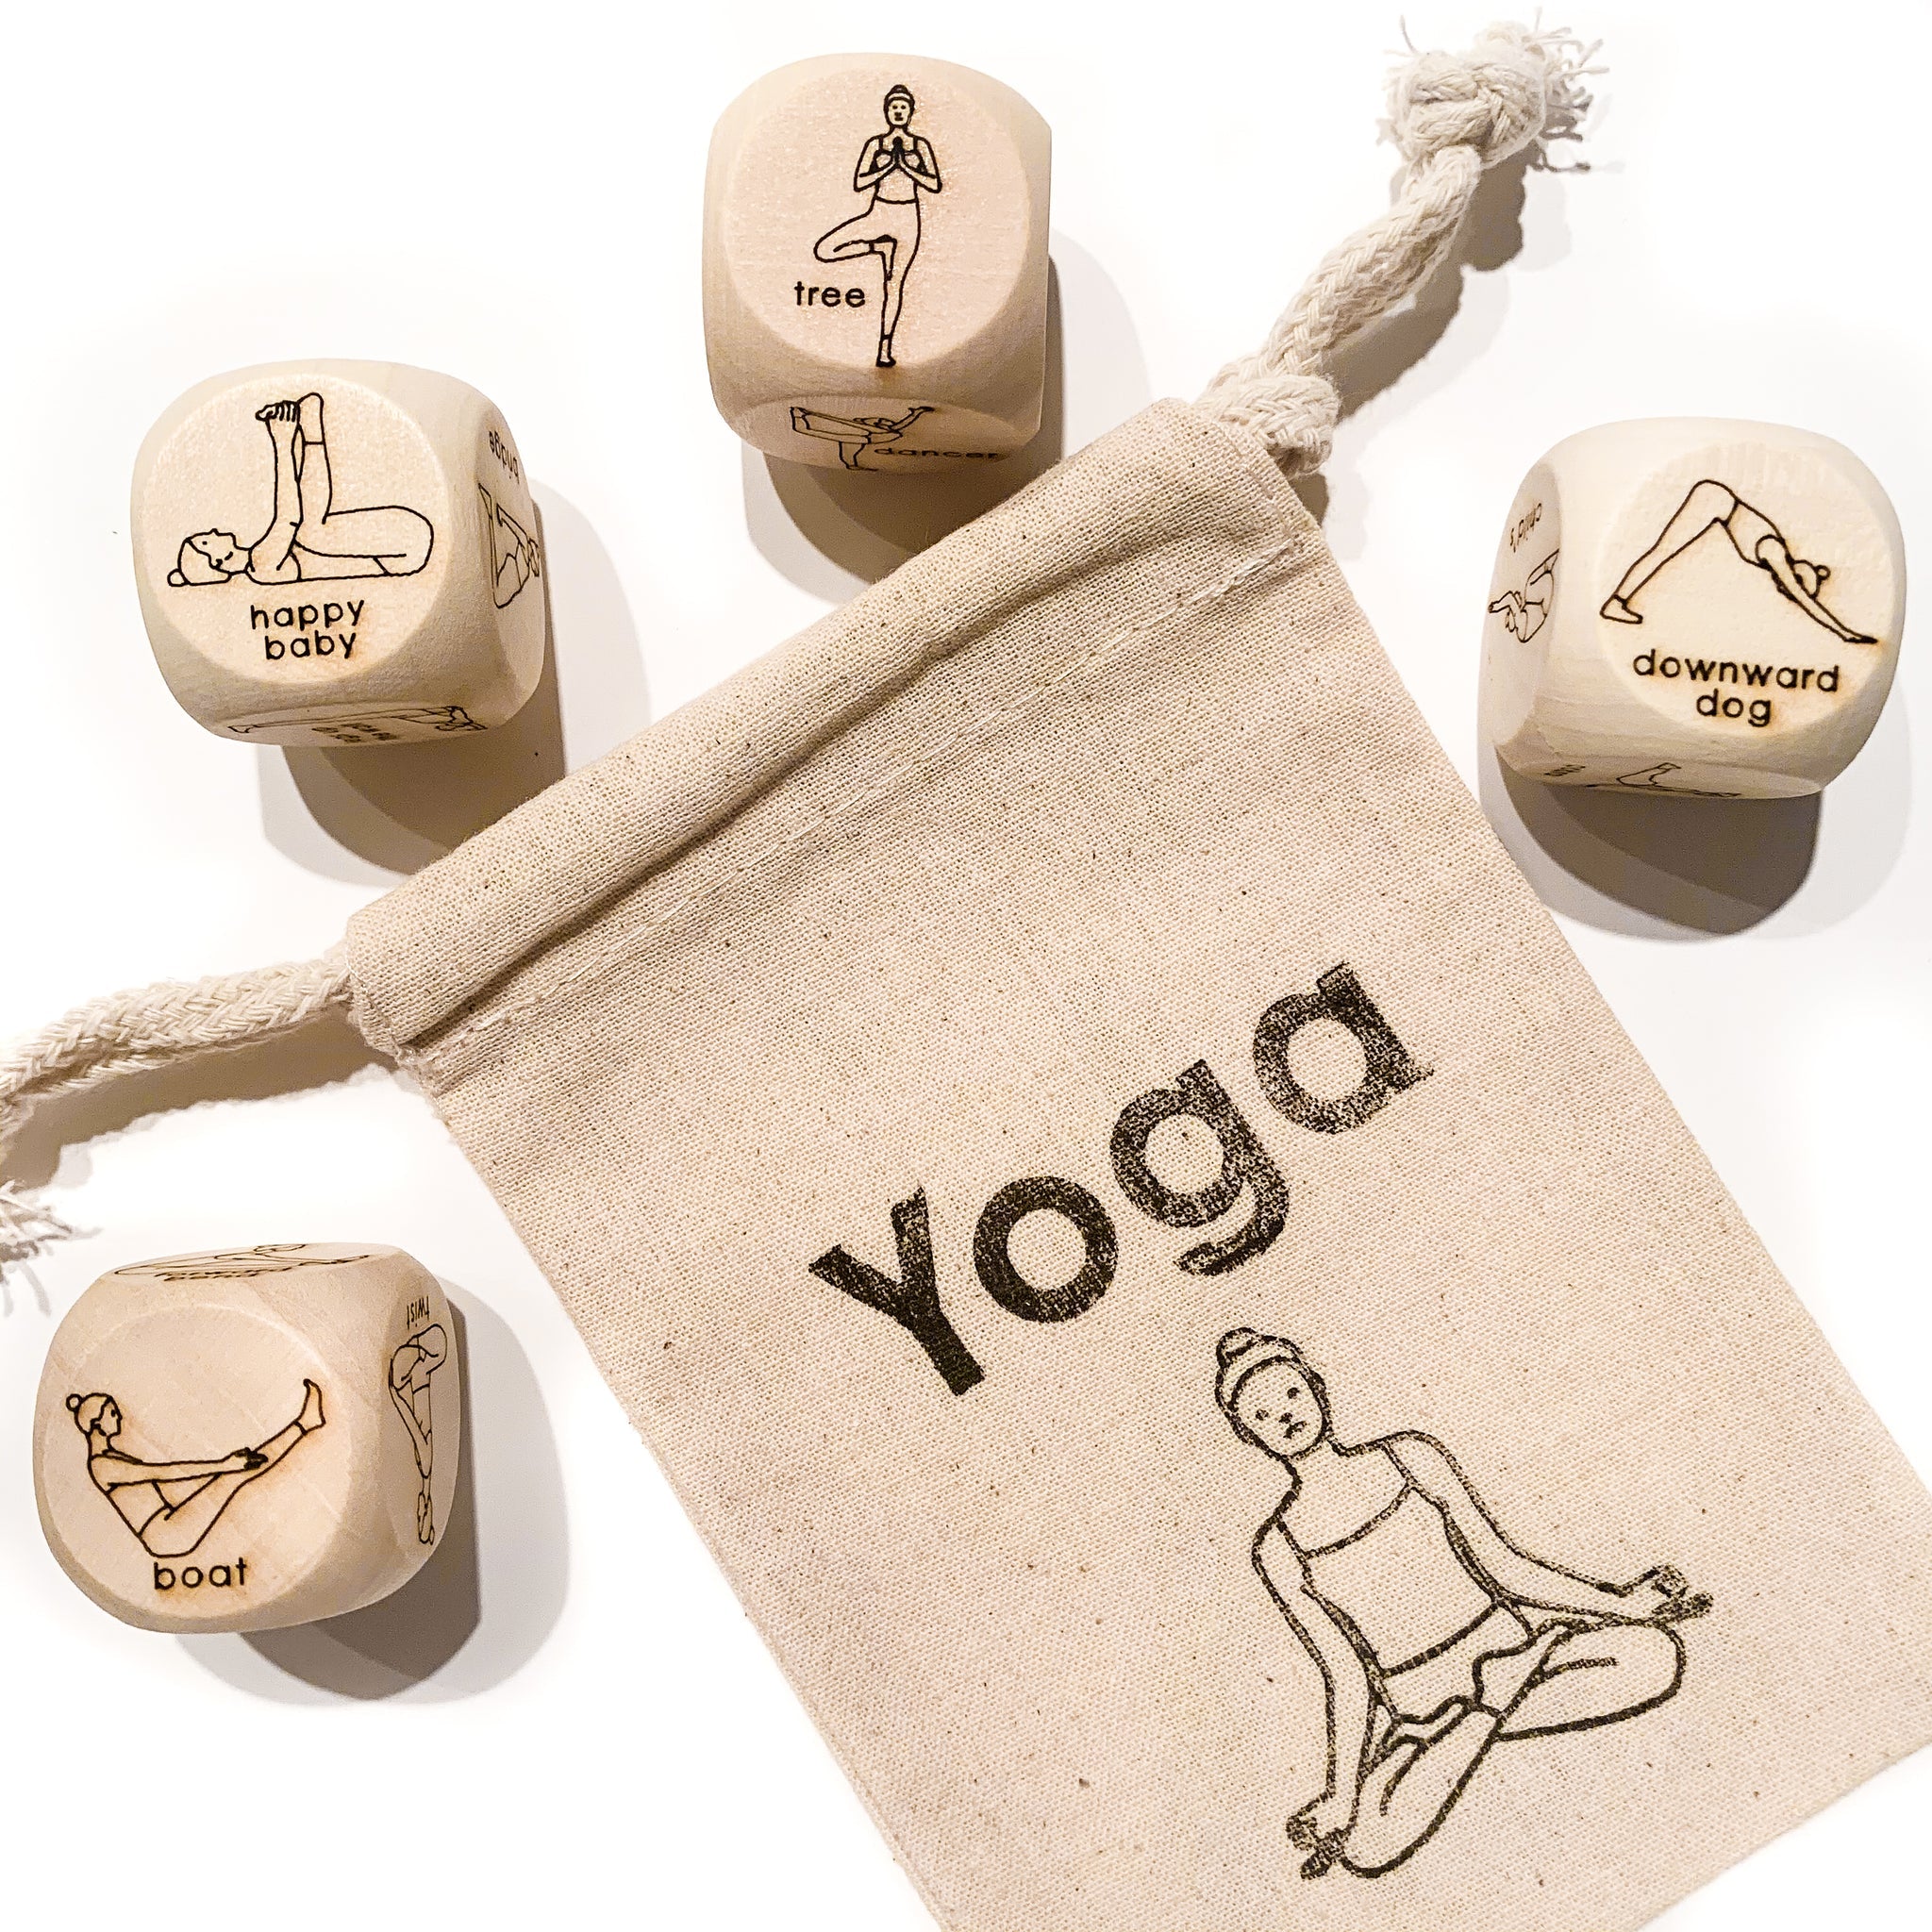 yoga dice – Dilly Dally Kids